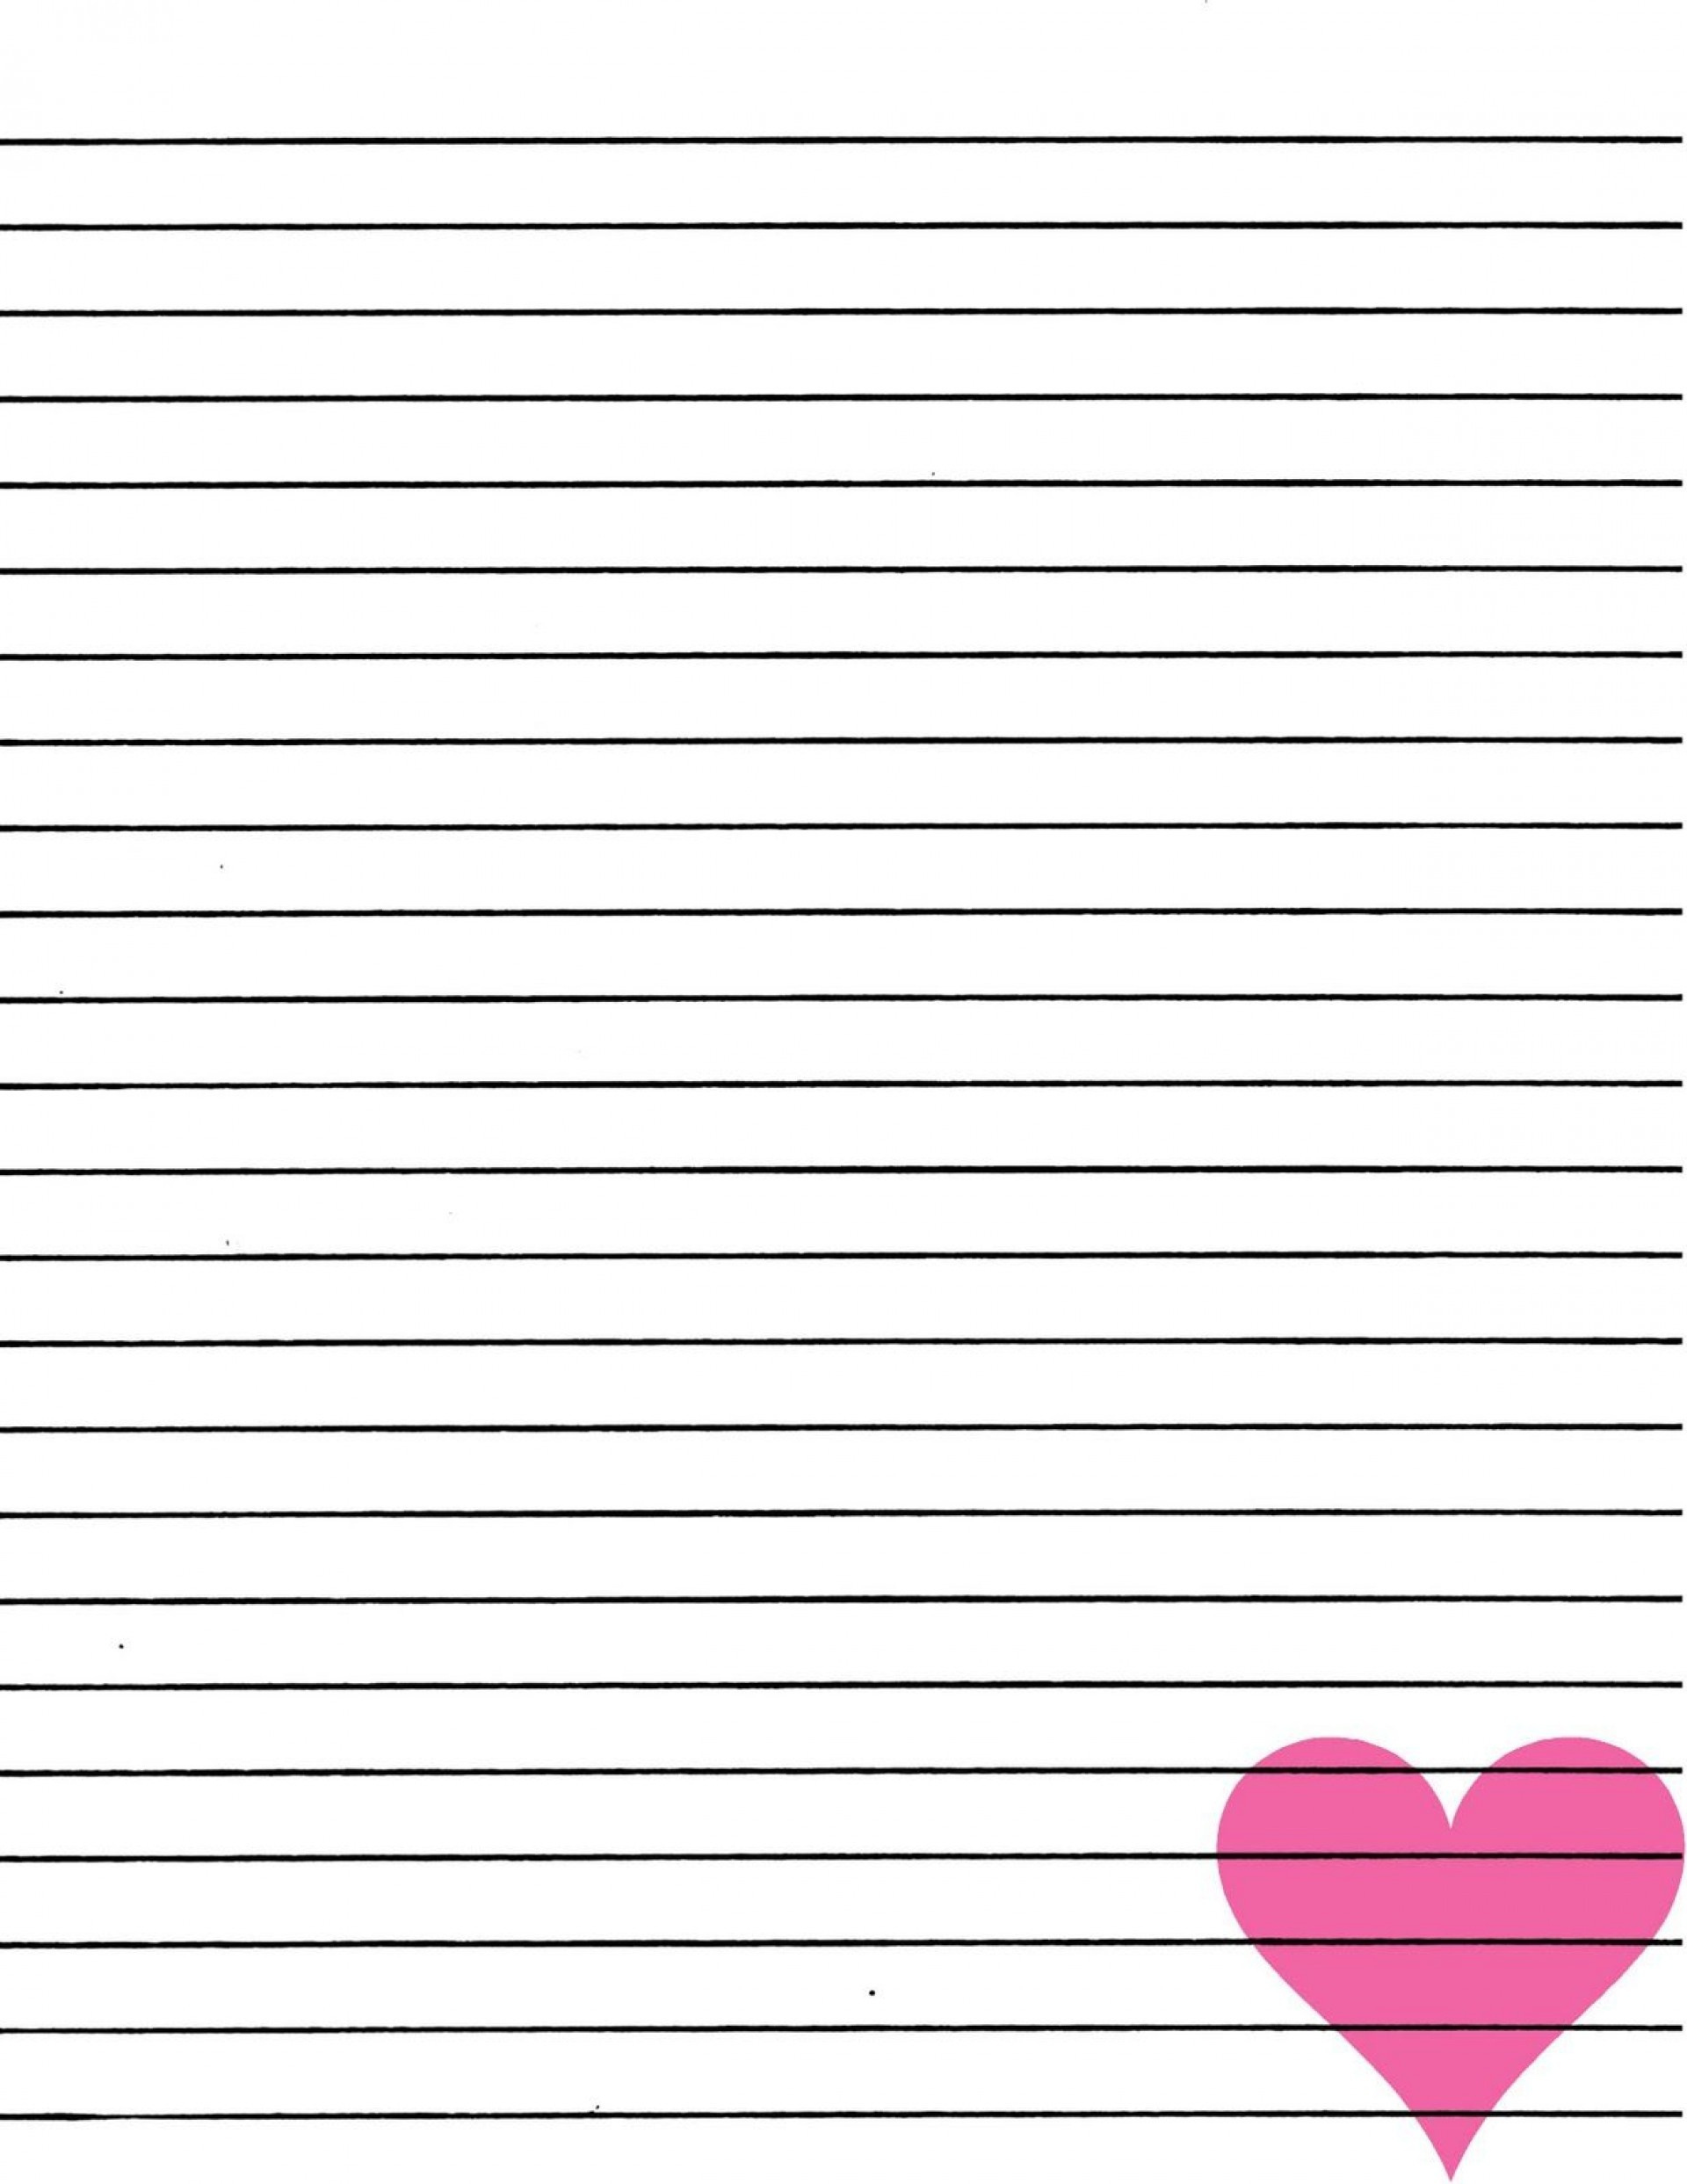 Lined Paper That I Can Print For Free